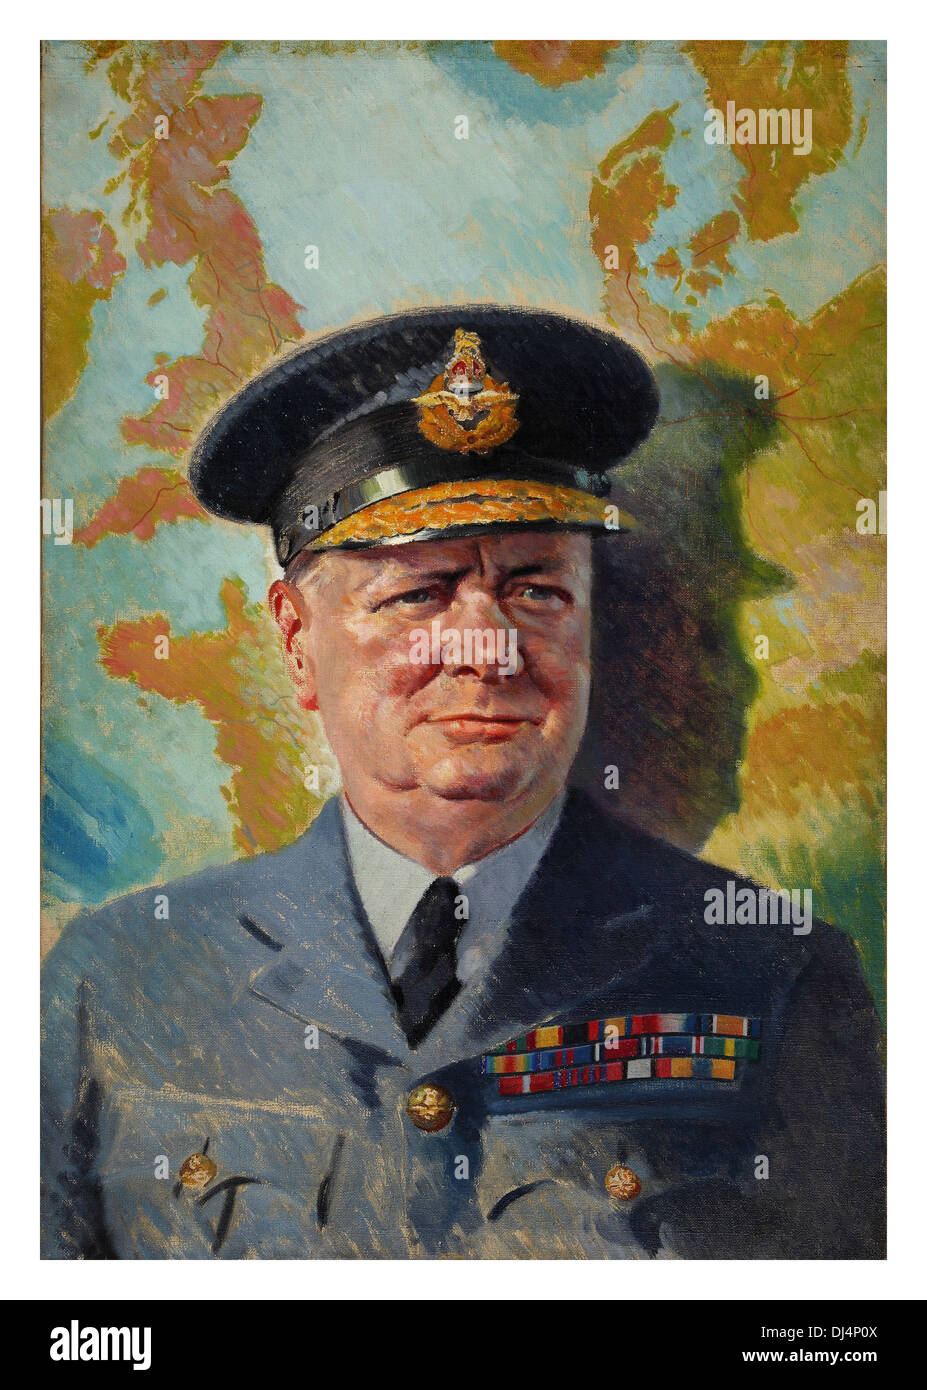 1940's wartime portrait of Winston Churchill in Royal Air force uniform Stock Photo